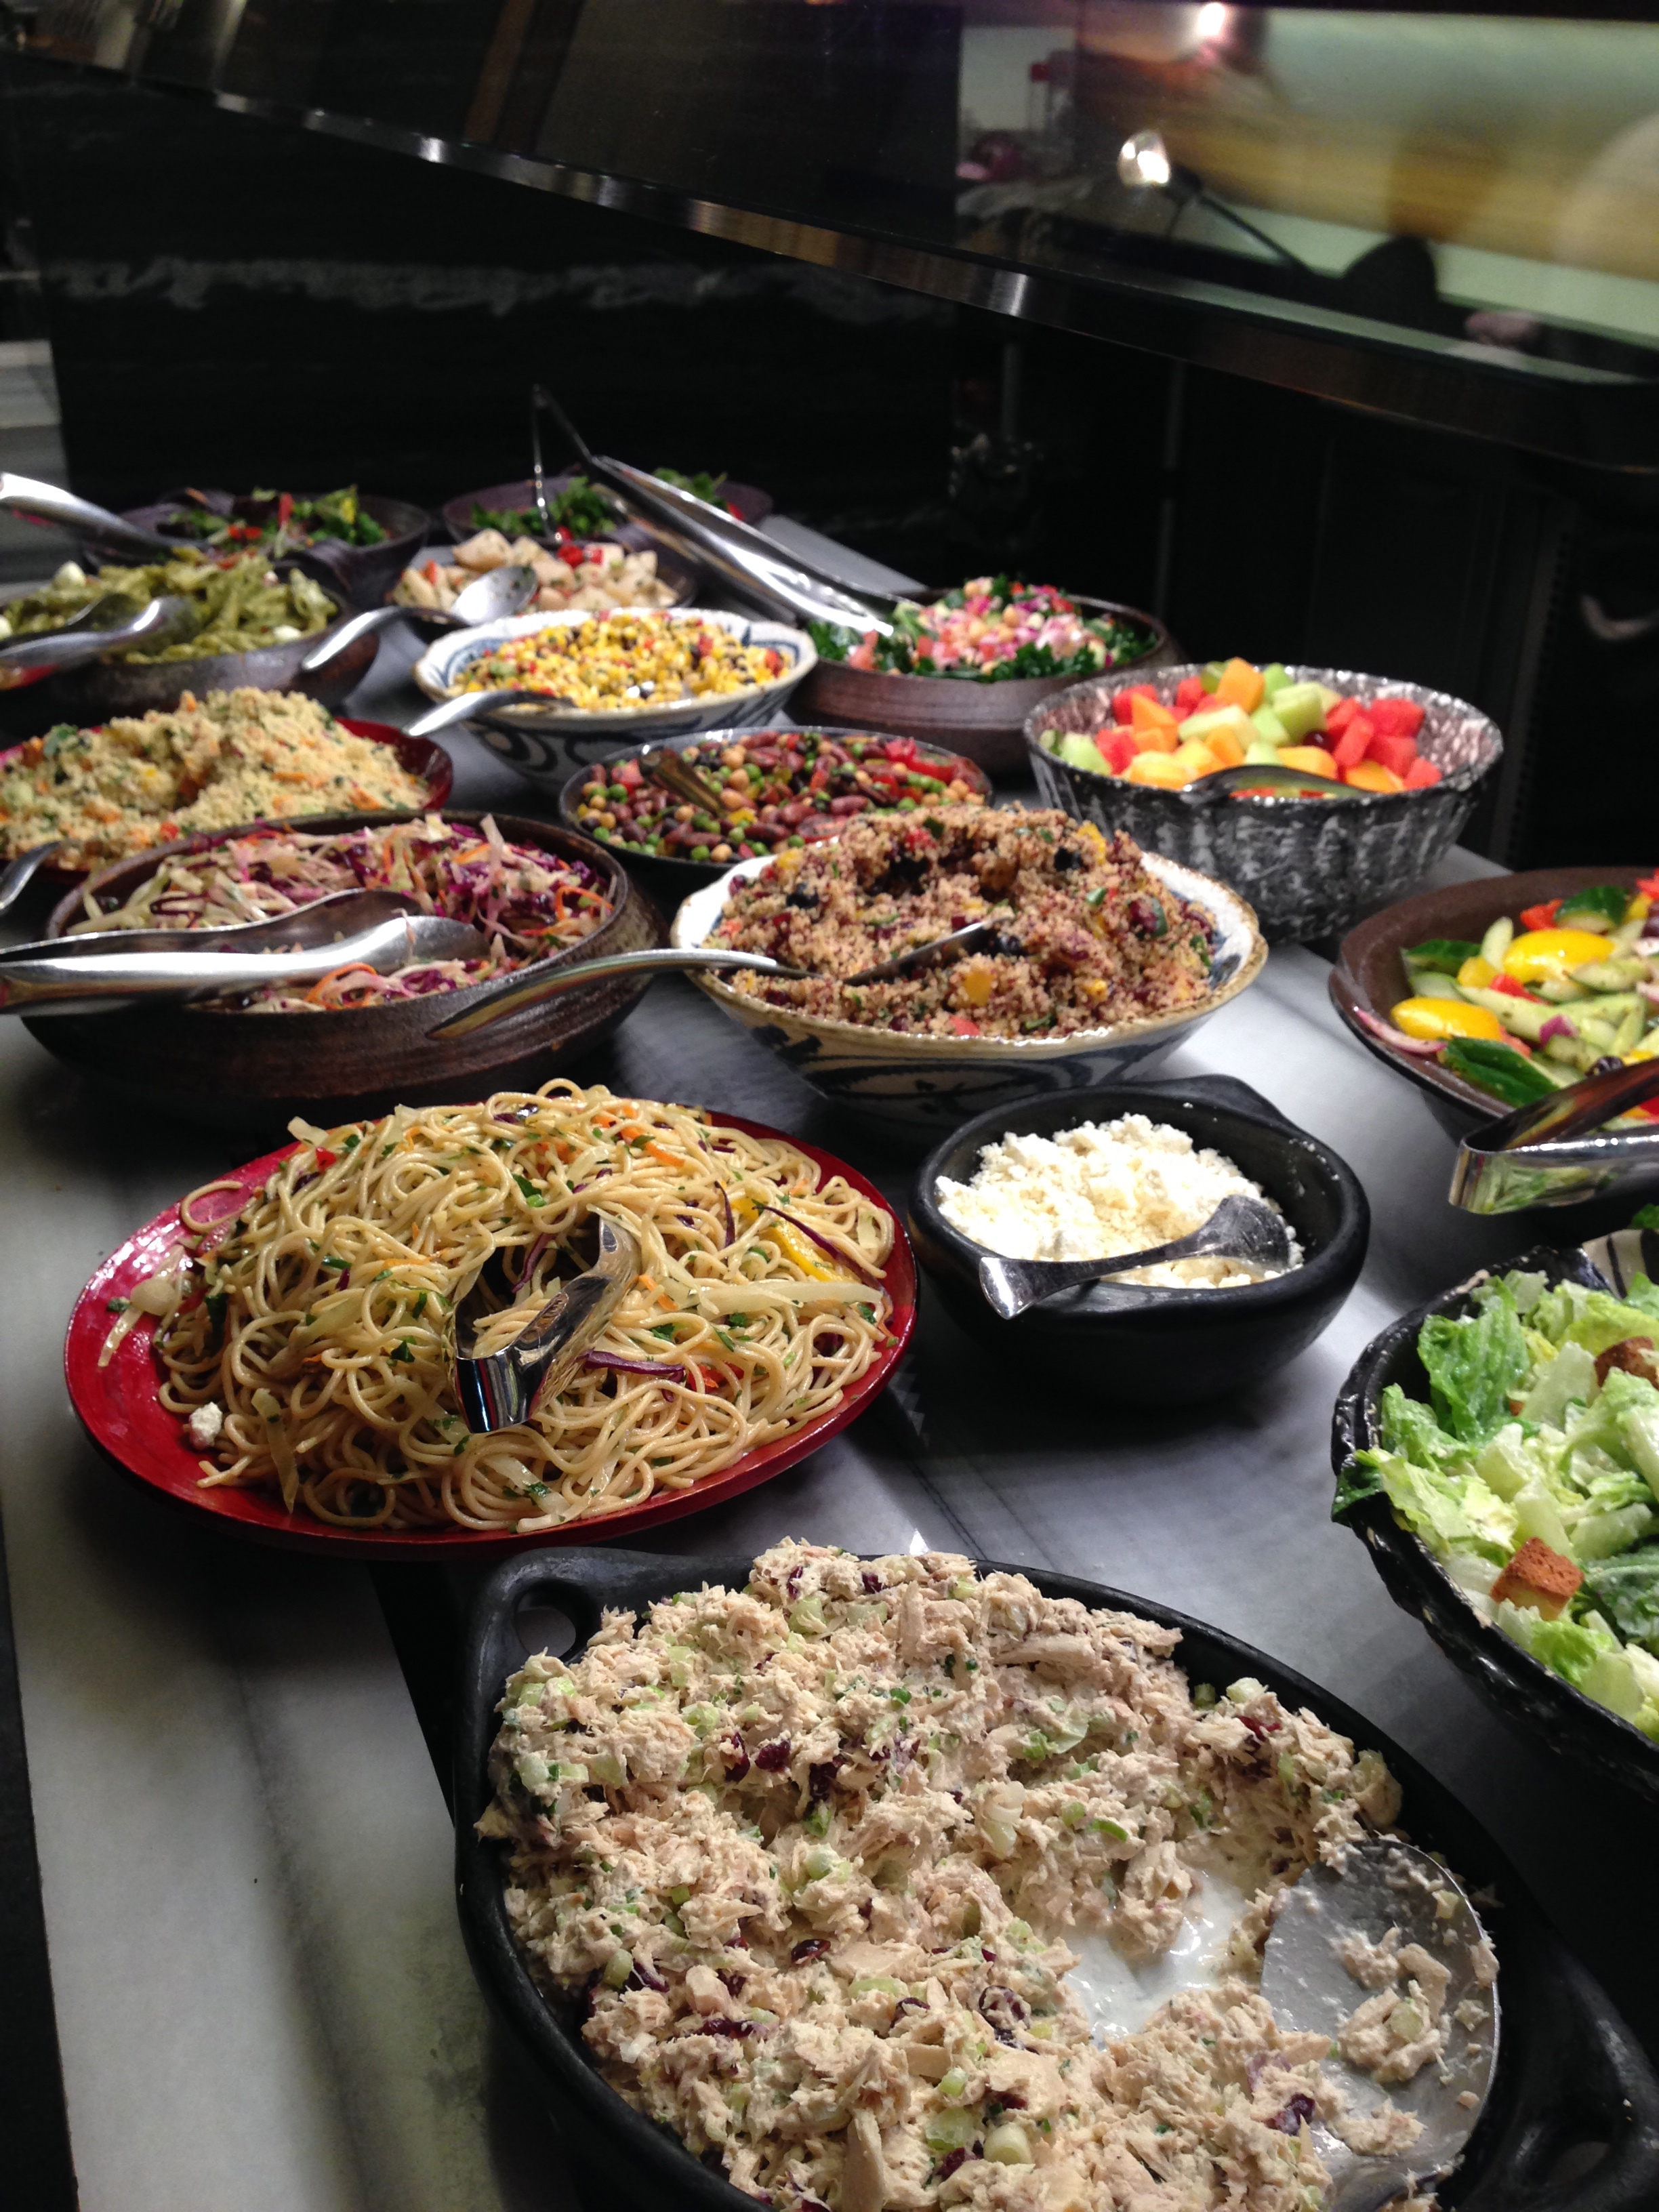 The large salad station with so many different and unique salads.